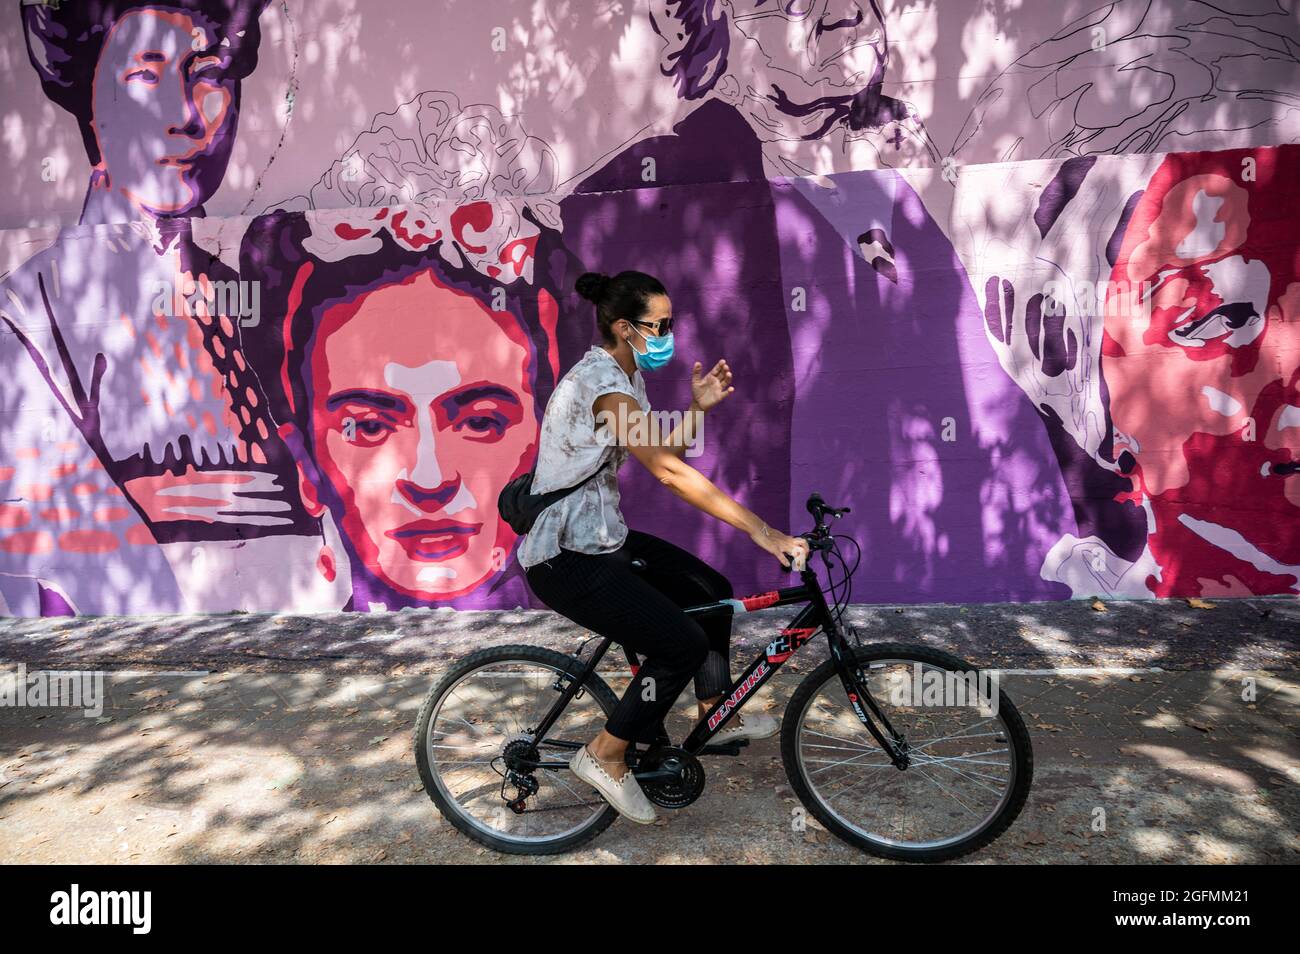 Madrid, Spain, 26/08/2021, A woman riding a bike passing by a feminist mural that is being repainted by members of UNLOGIC artistic group. The mural appeared vandalized during the past International Women's Day and represents famous women from around the world, with the faces of 15 women who are part of history for their fight in favor of equality: Angela Davis, Frida Kahlo, Nina Simone, Rigoberta Menchu, Lucia Sanchez Saornil, Rosa Arauzo, Valentina Tereshkova, Chimamanda Ngozi, Emma Goldman, Kanno Sugato, Liudmila Pavlichenko, Billy Jean King, Gata Cattana, Rosa Parks, and Comandanta Ramona. Stock Photo